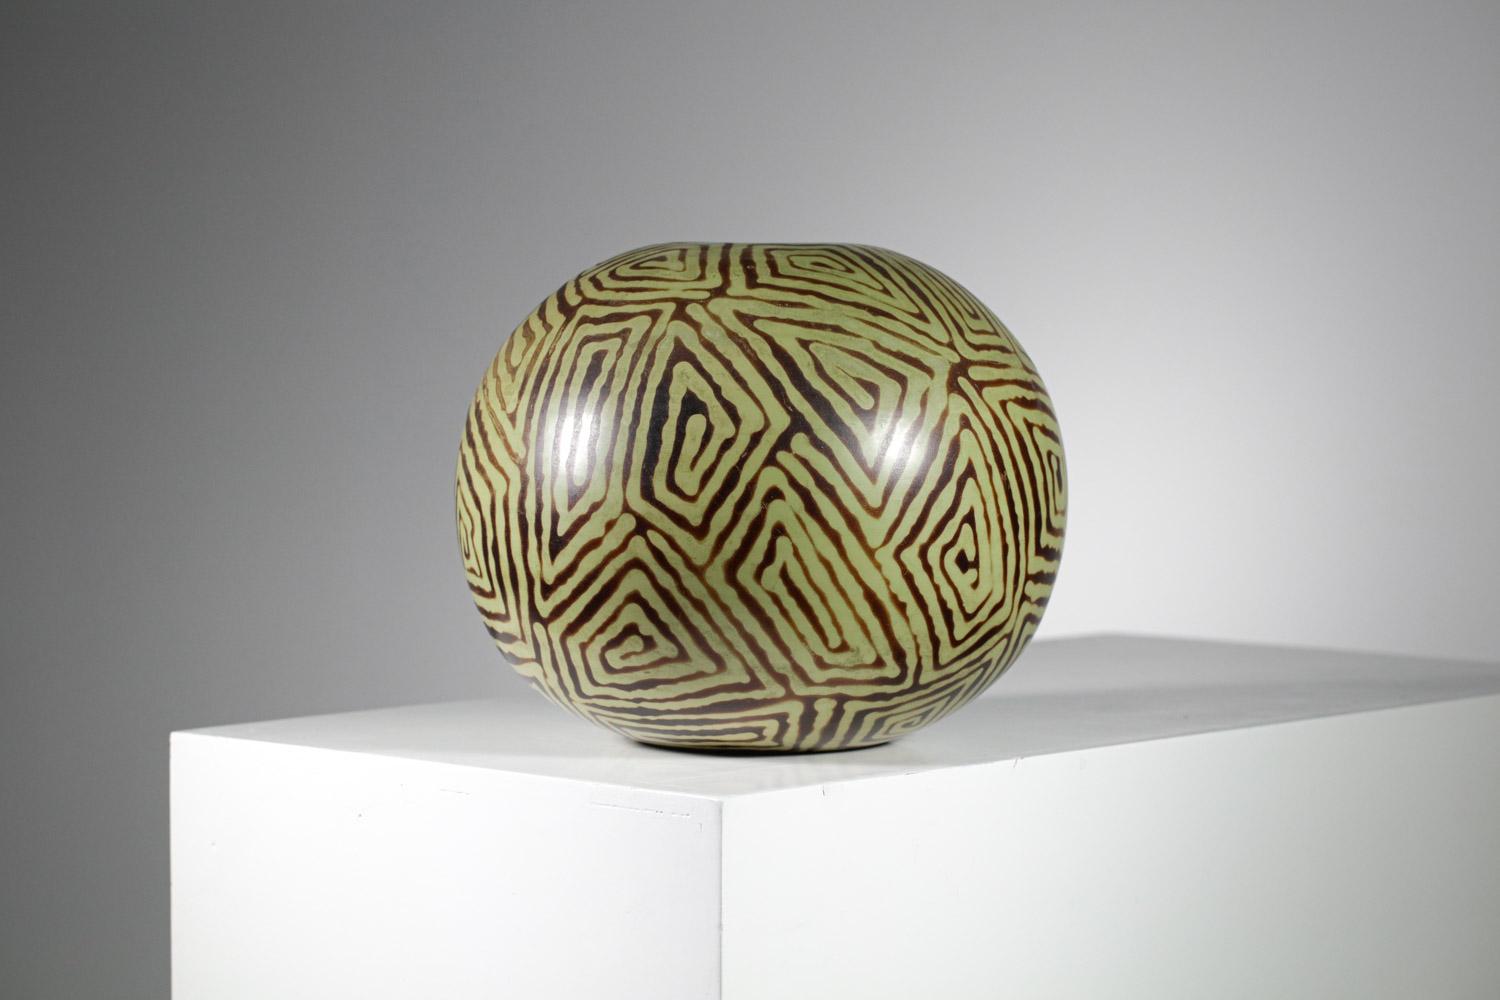 Unknown Large Ball Vase with Geometrical Design Art Deco Style - E088 For Sale